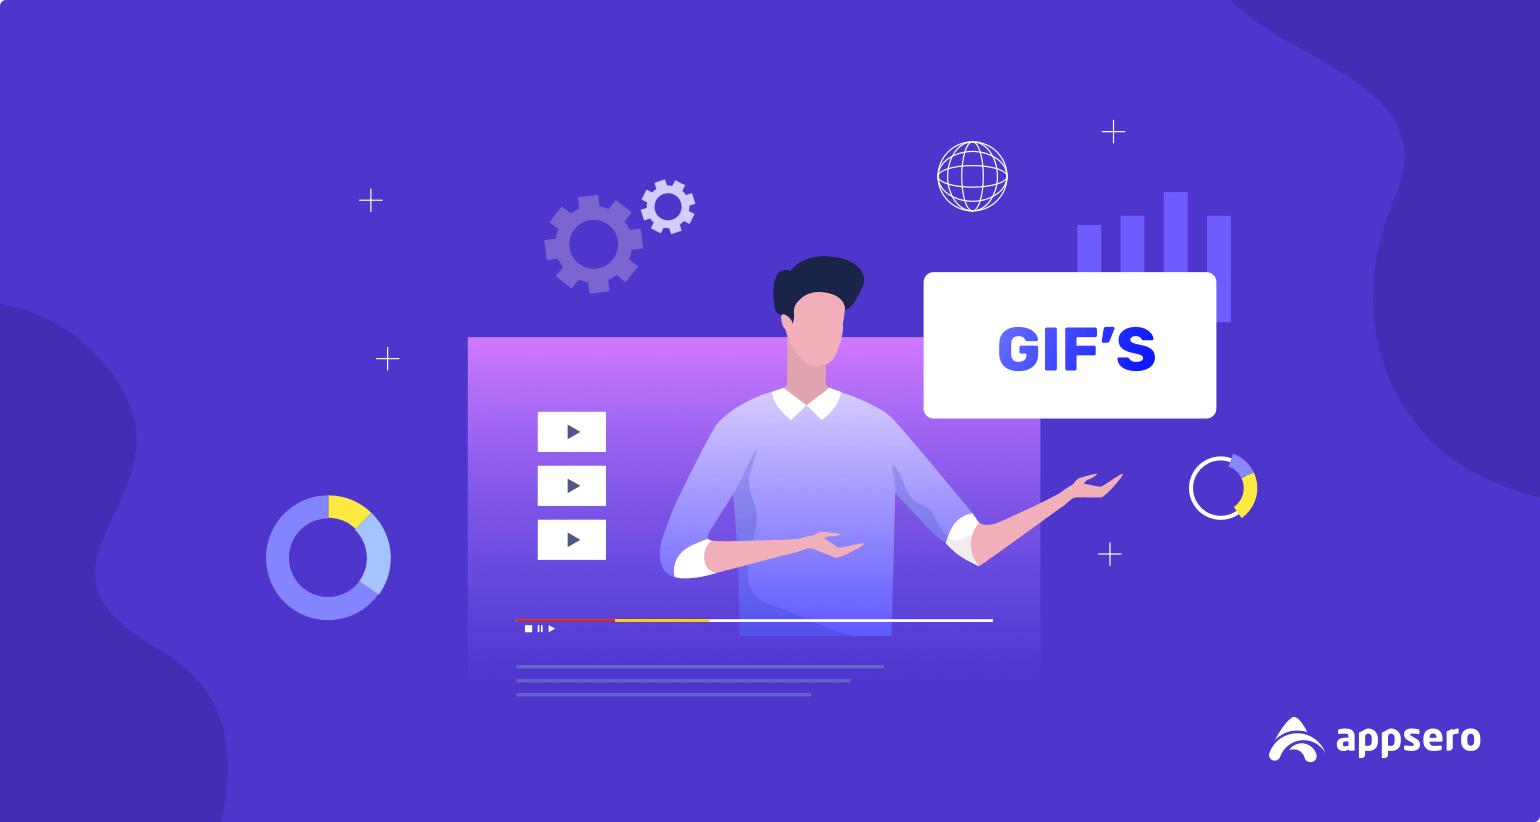 How to Add GIF in WordPress That Increases Your Conversion